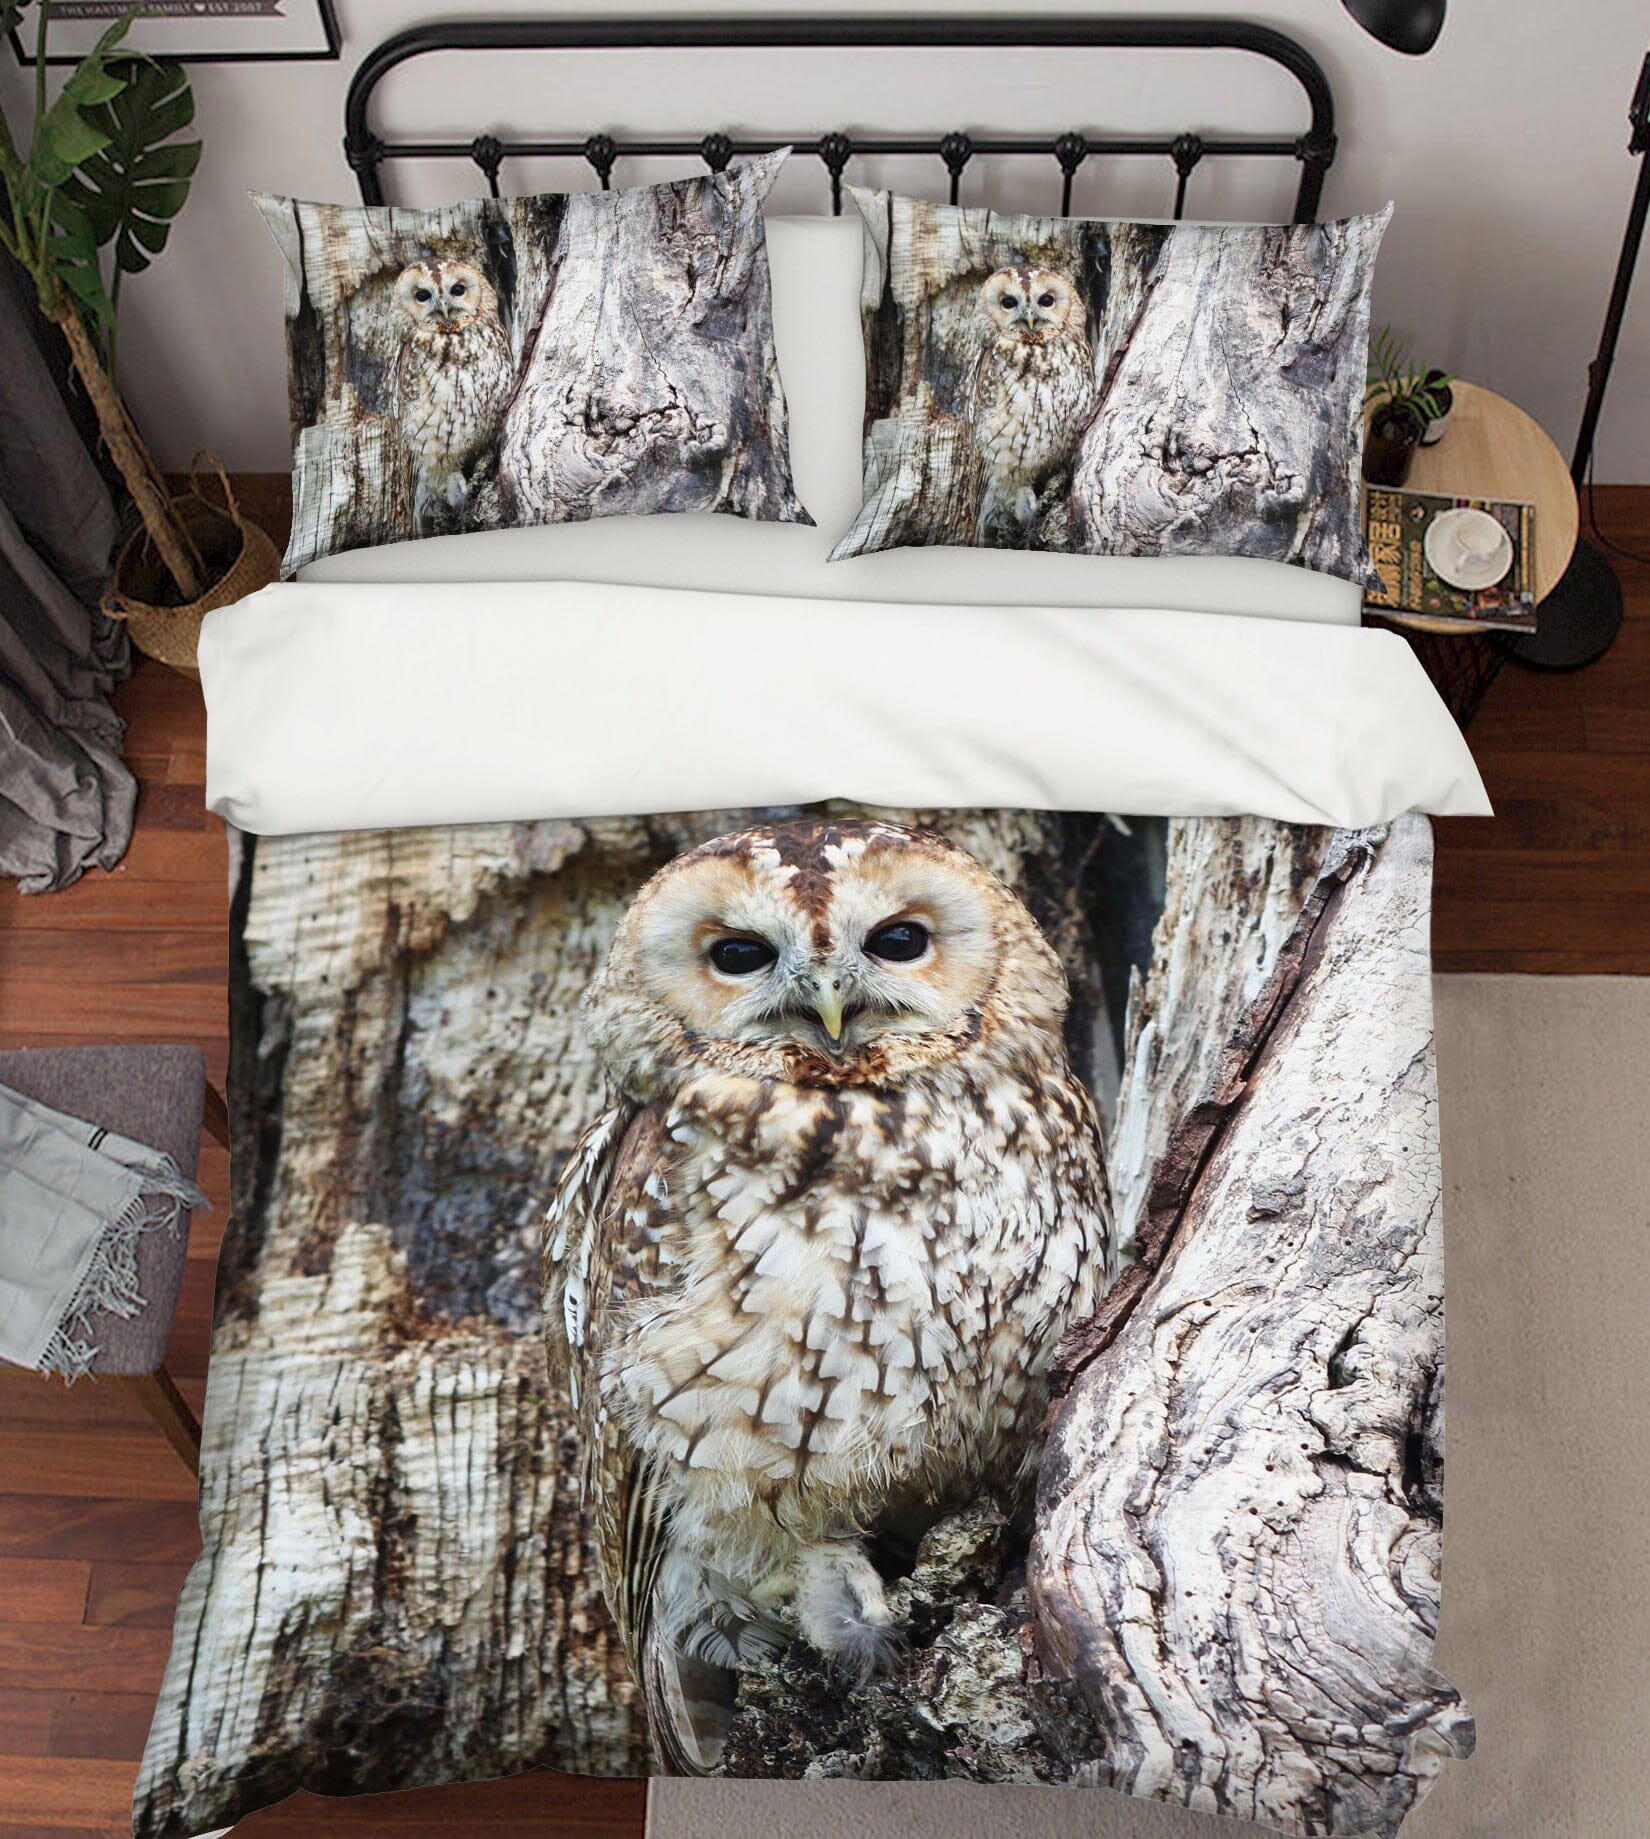 3D Owl 1932 Bed Pillowcases Quilt Quiet Covers AJ Creativity Home 